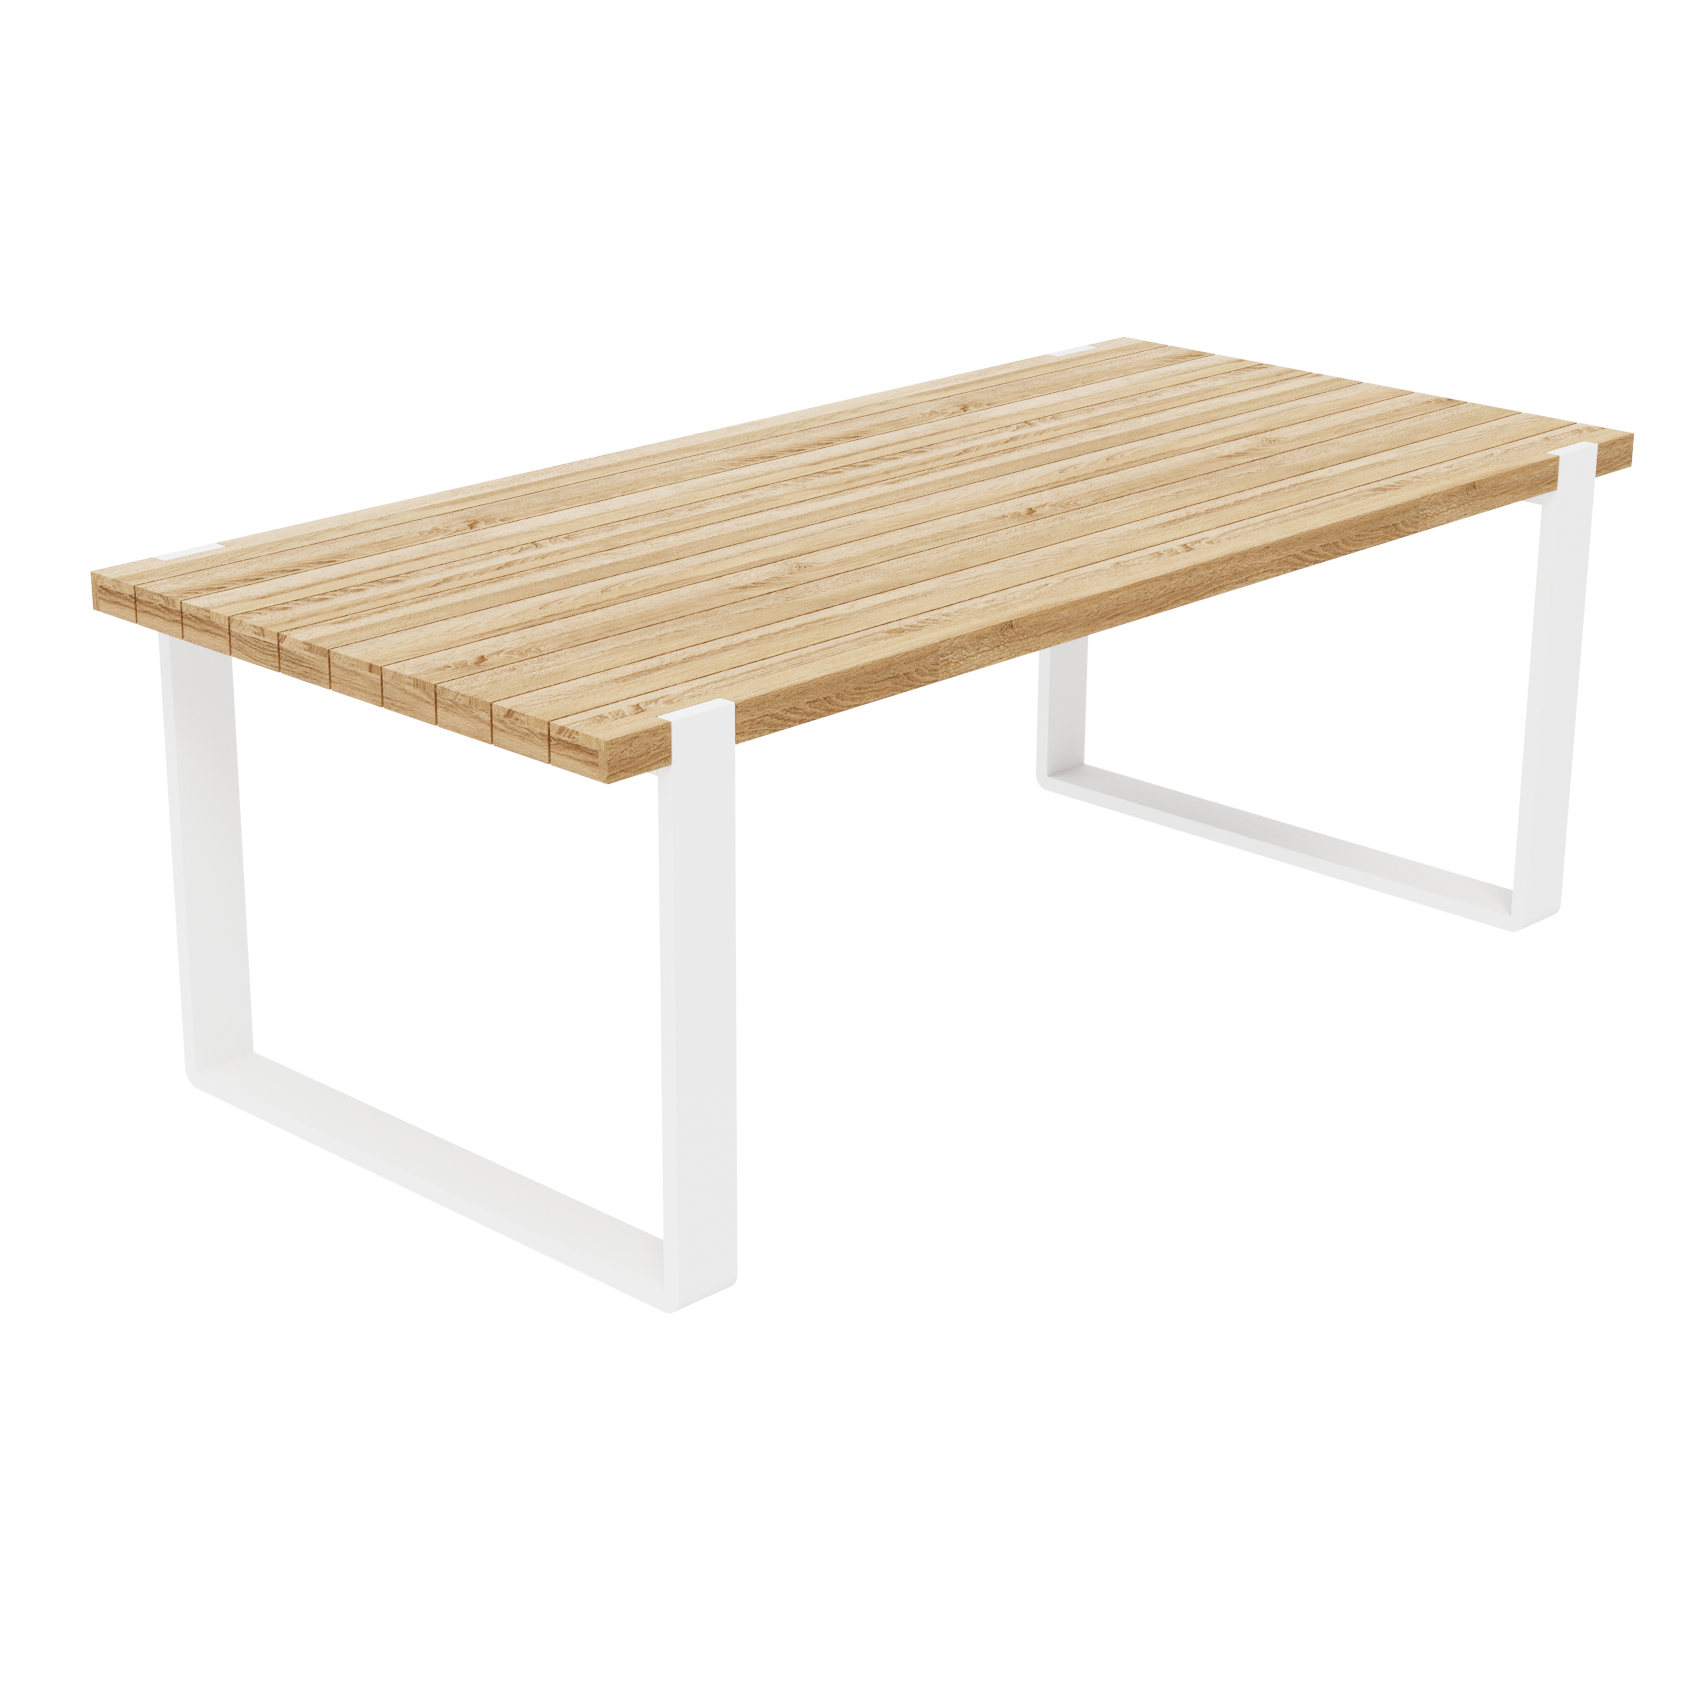 MONTEGO DINING TABLE